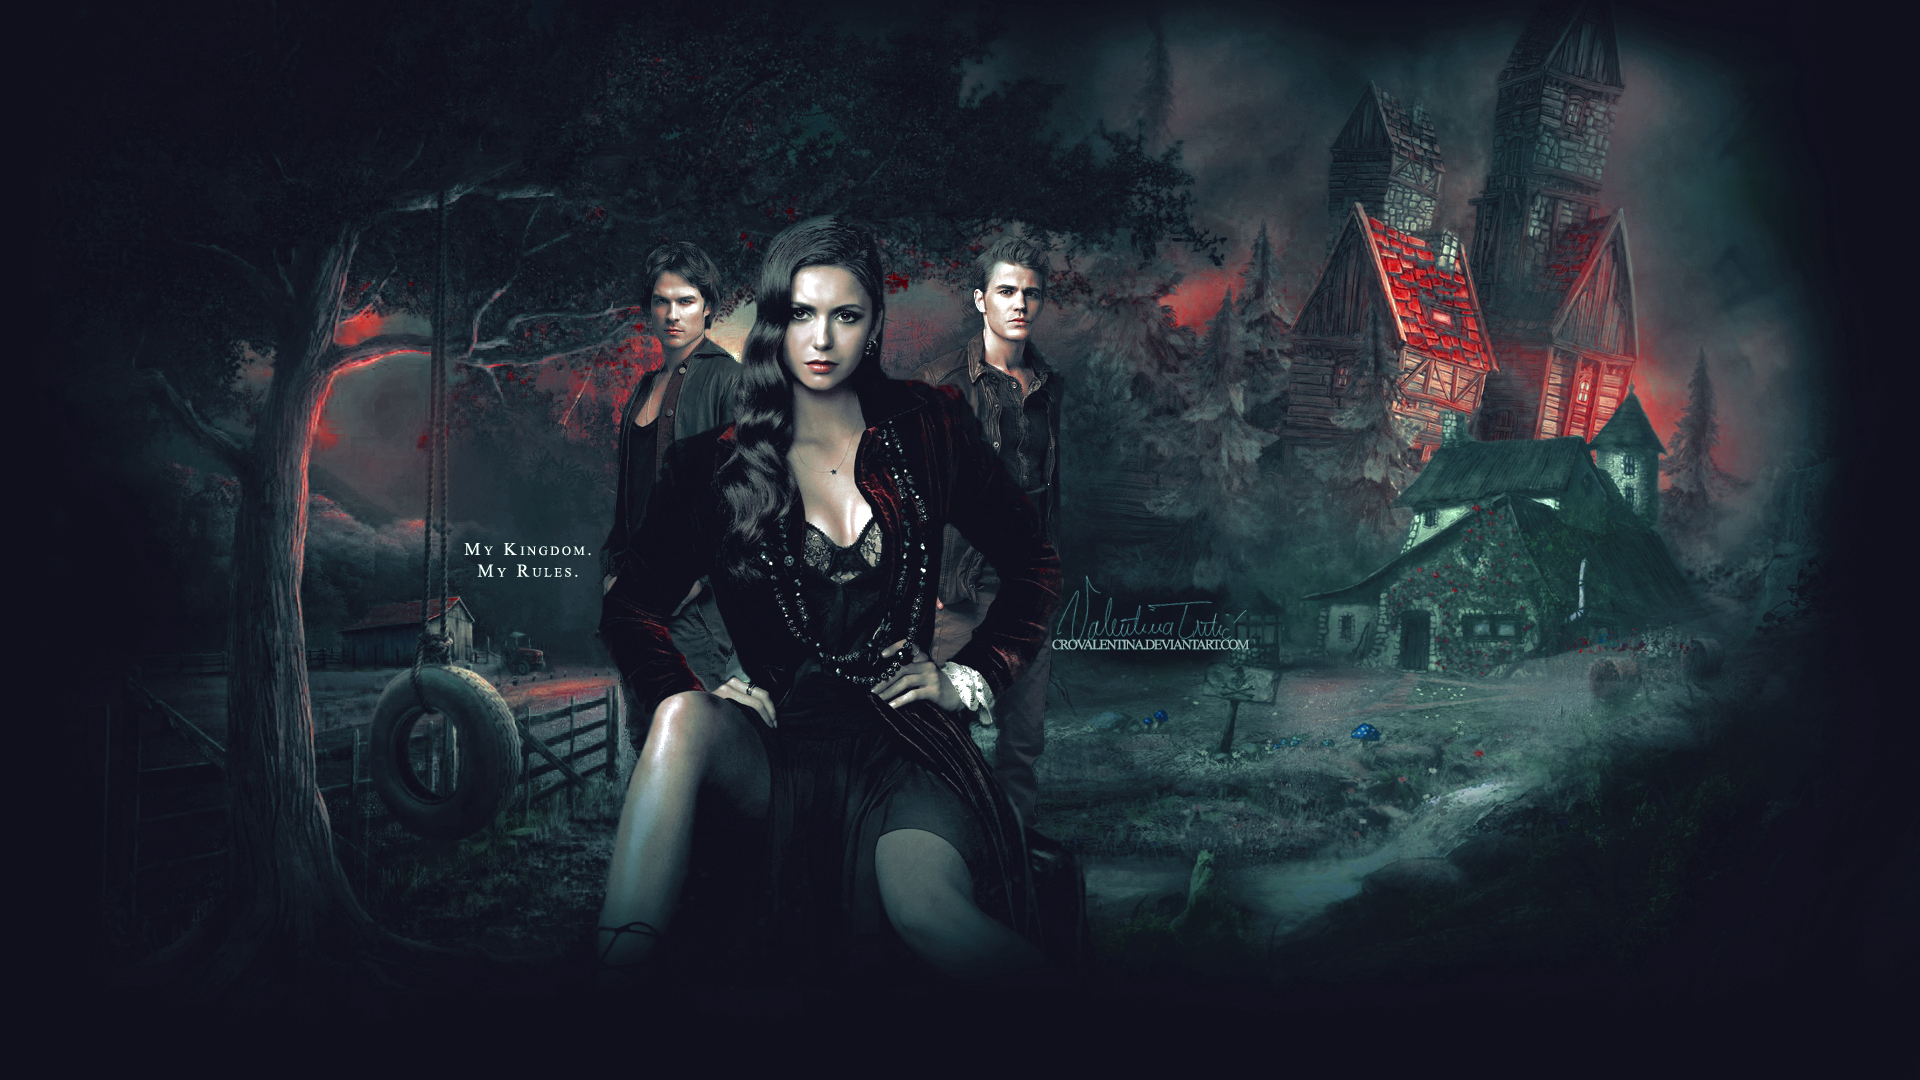 1920x1080 Free download The Vampire Diaries images The Vampire Diaries HD wallpaper and [] for your Desktop, Mobile \u0026 Tablet | Explore 74+ The Vampire Diaries Wallpaper | Vampire Diaries All Seasons Wallpapers